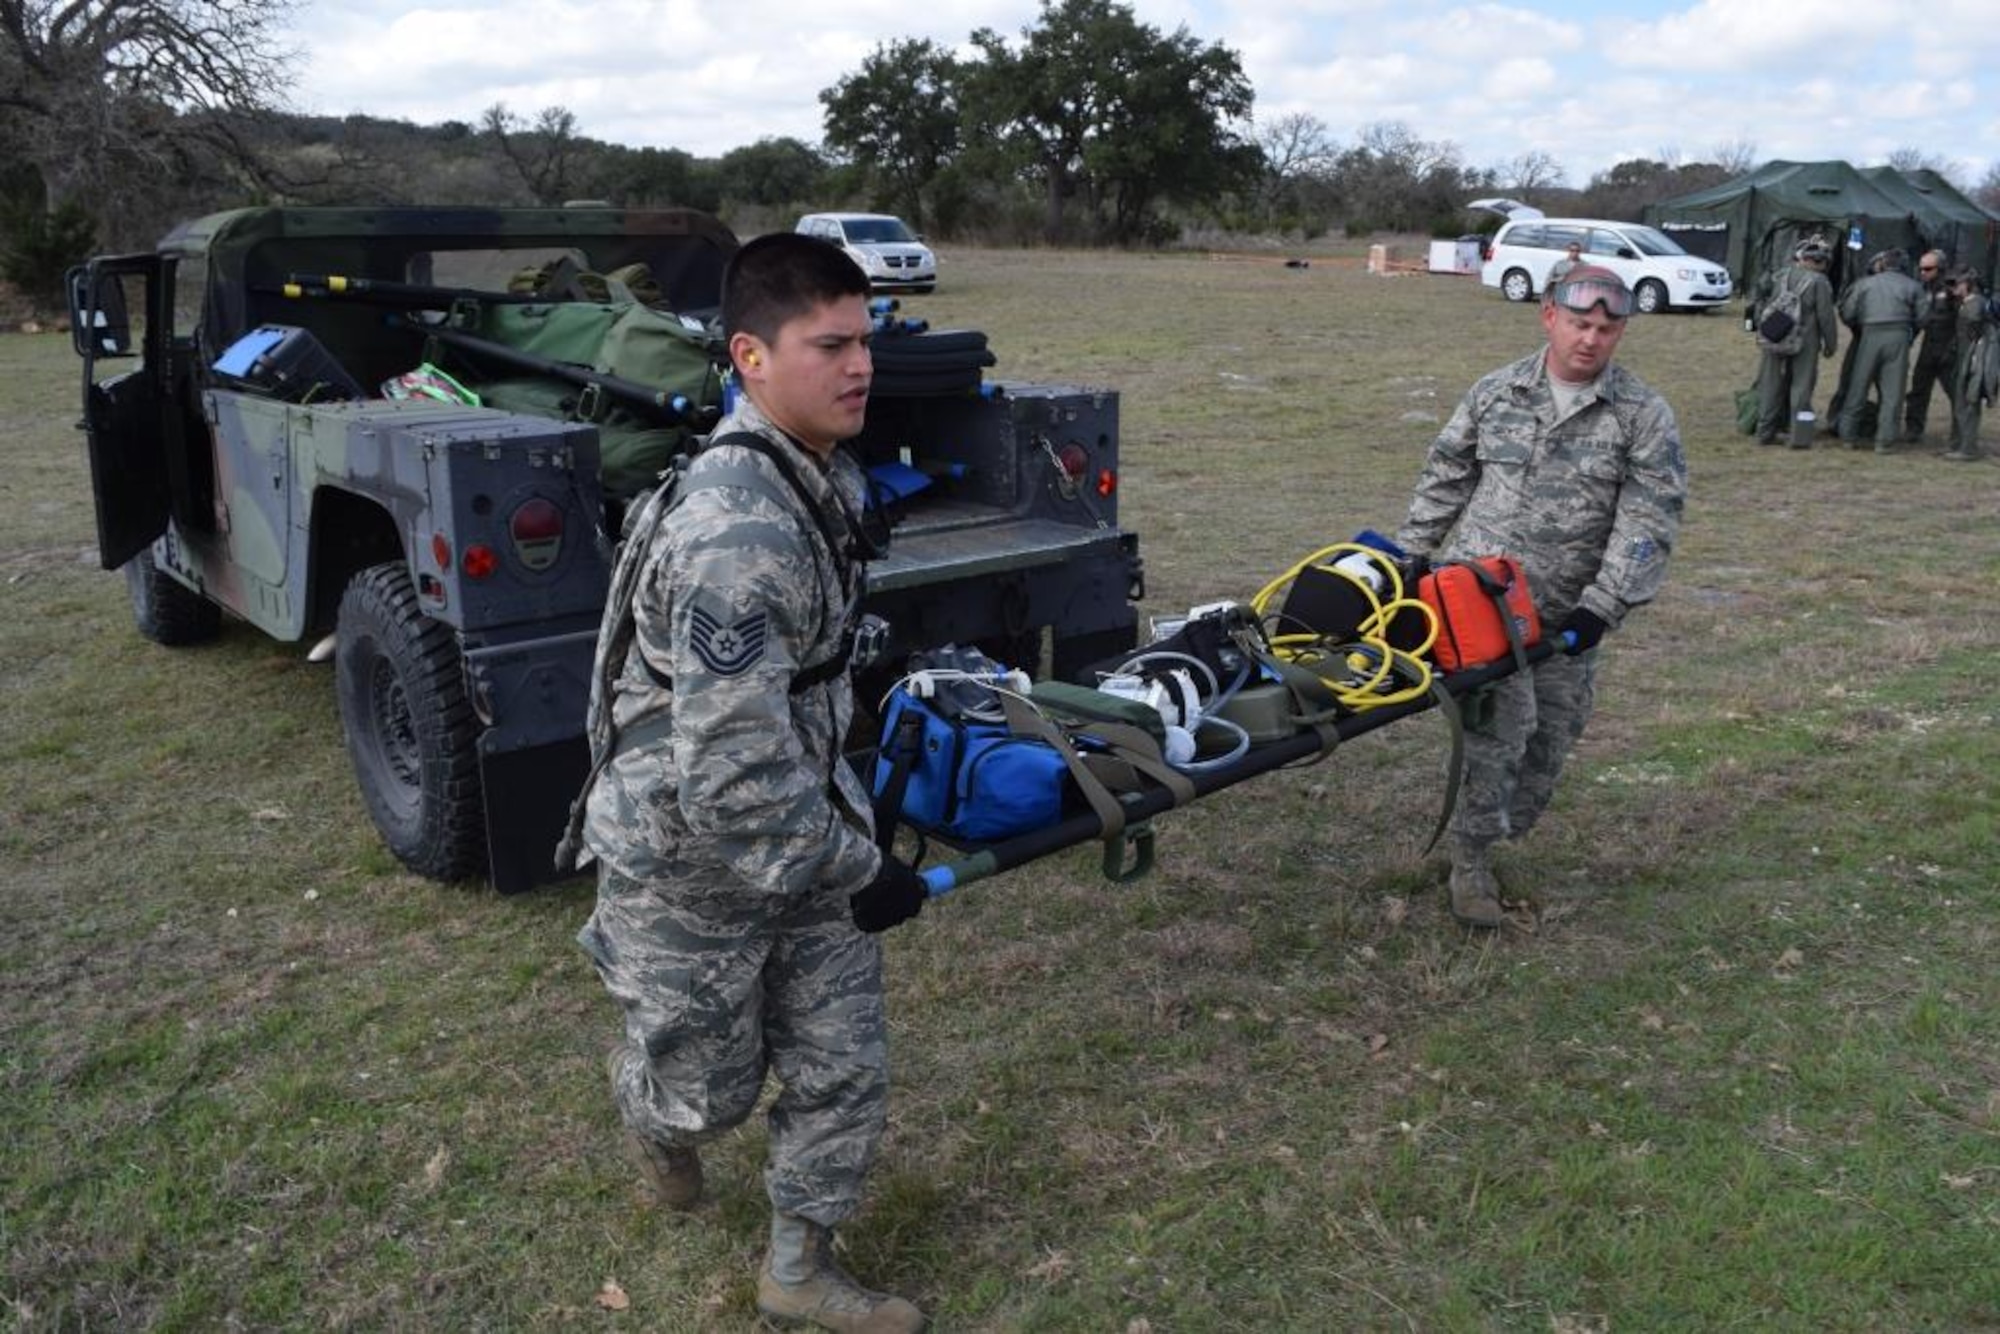 Tech. Sgts. Kristopher Orna (left) and Joshua Smith, both assigned to the 433rd Aeromedical Evacuation Squadron, unload AE equipment and prepare it for loading on the out-bound flight during the Alamo Shield exercise at Camp Bullis Training Annex Feb. 27, 2016. Orna and Smith are working as a part of one of the two Aeromedical Evacuation Operations Teams who coordinate the air crews and provide operational and mission management support by coordinating the proper equipment necessary for the mission, directs AE ground support activities like mission launch and recovery, aircraft set up and configuration, and manages medical equipment and supplies. (U.S. Air Force photo/Senior Airman Bryan Swink)